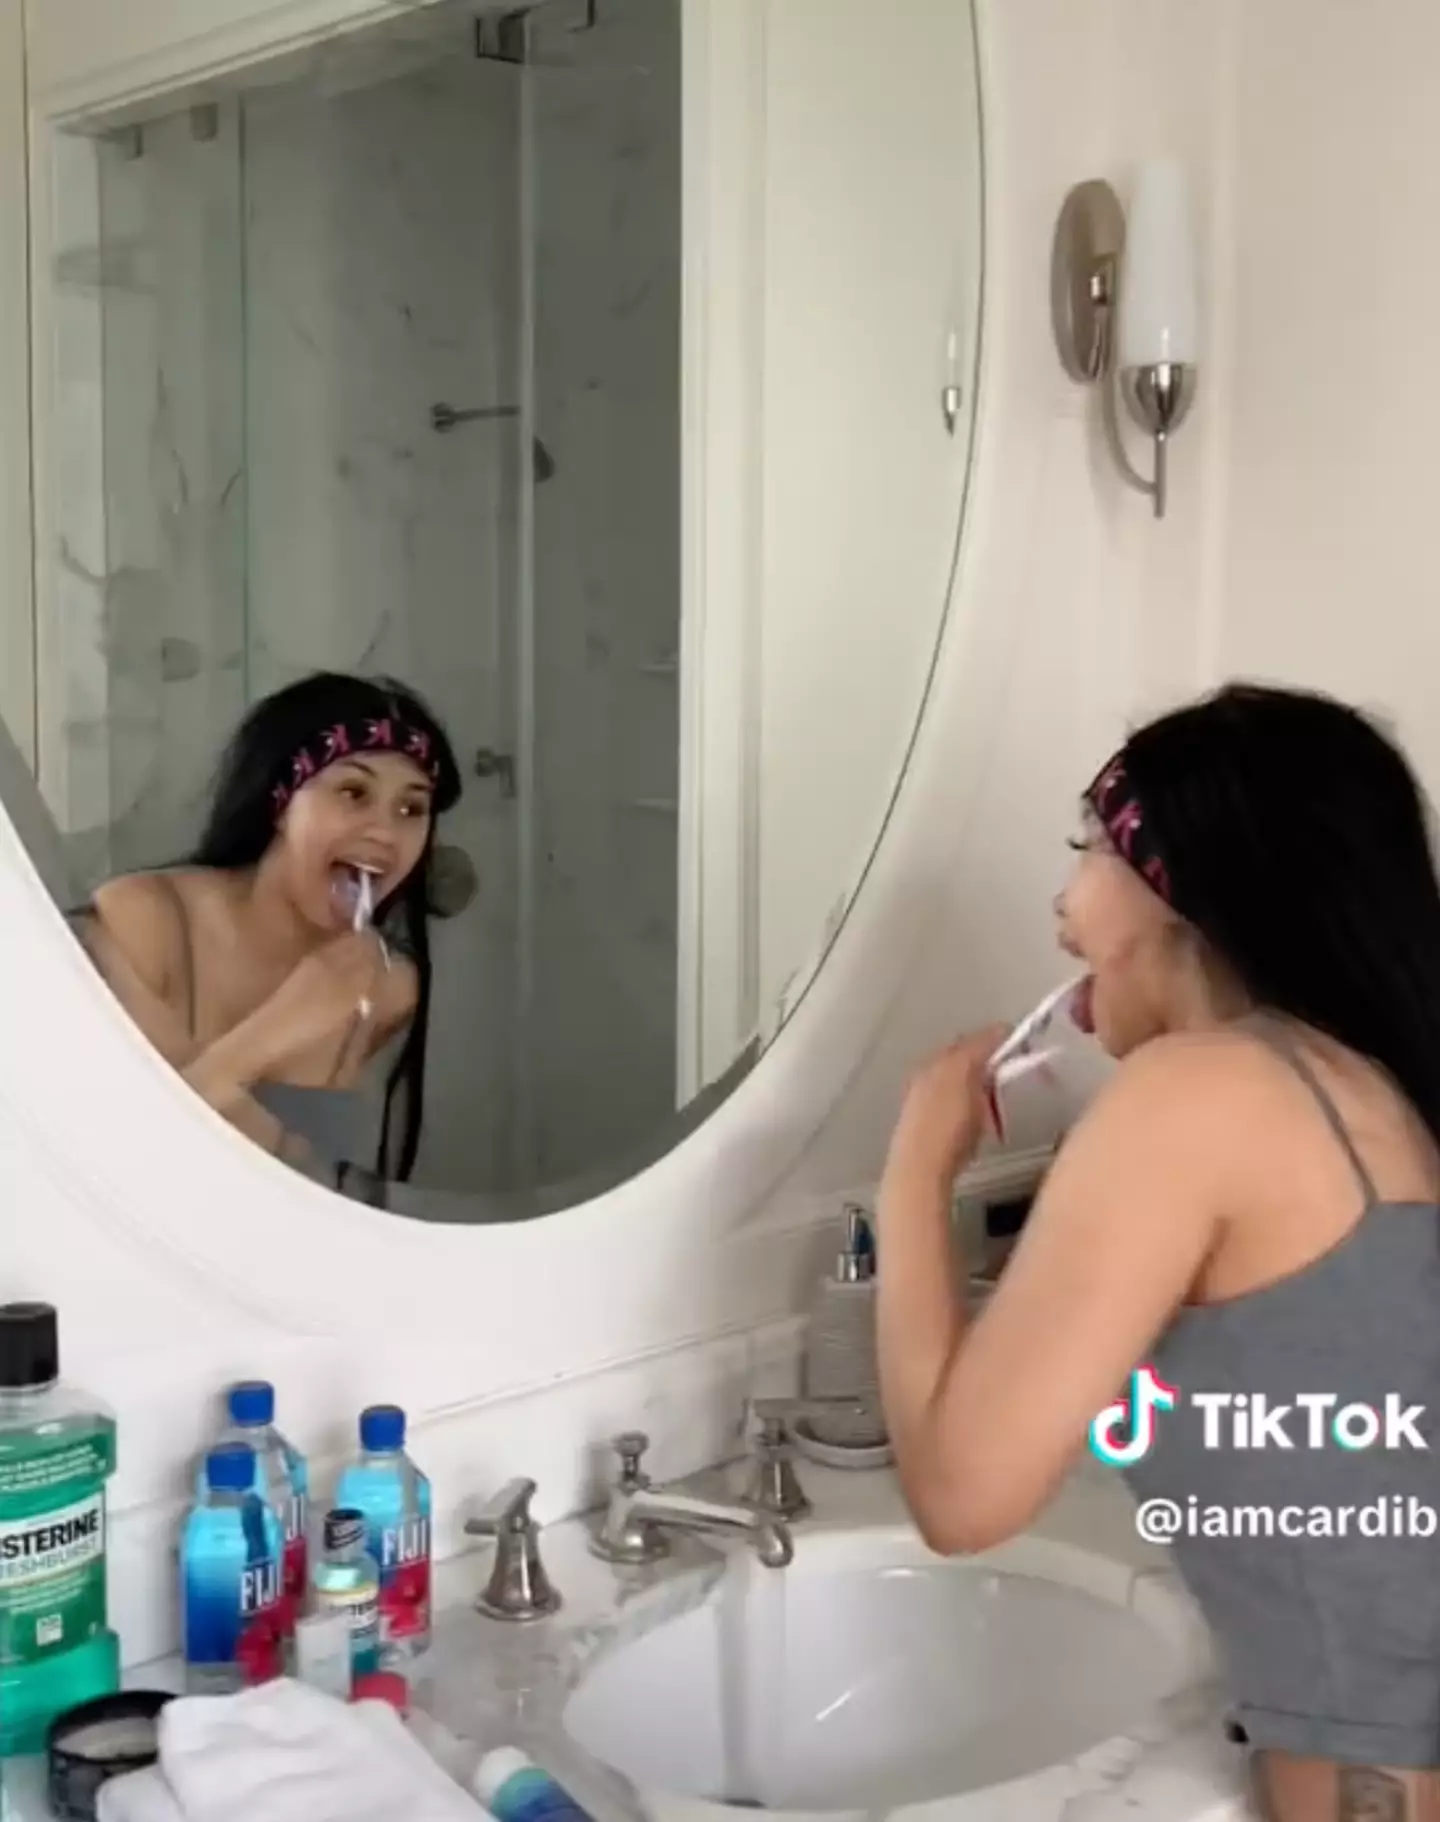 Cardi B shared a look at a day in her life with fans.